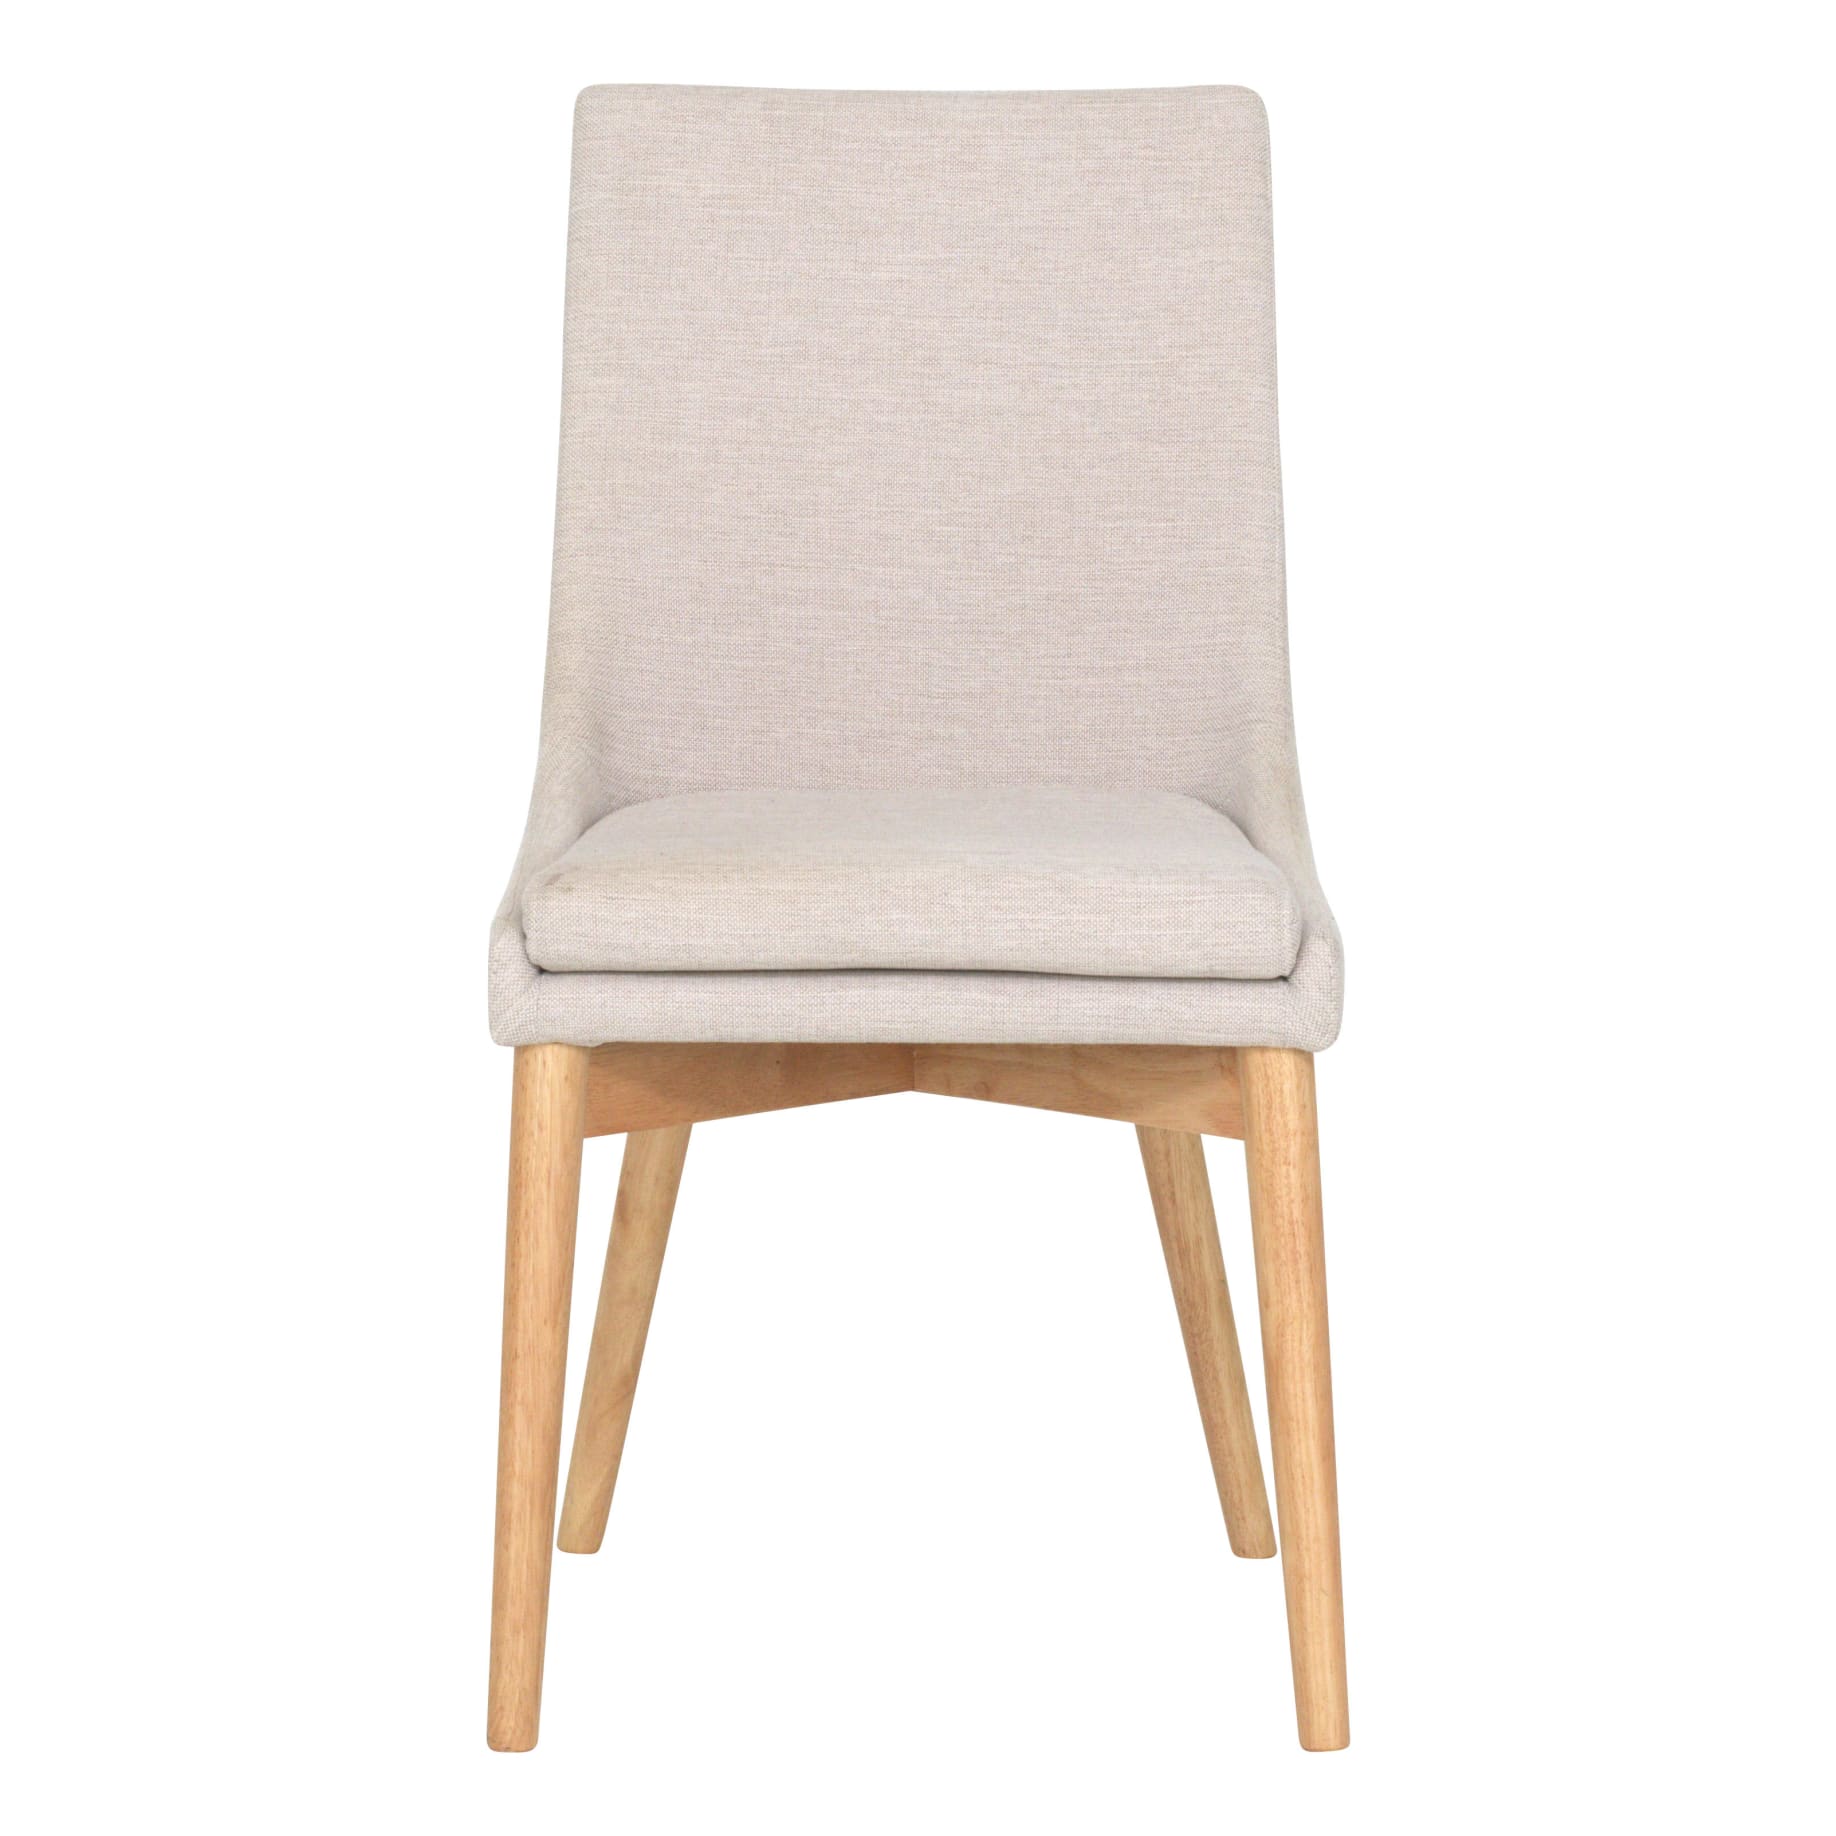 Highland Dining Chair in Beige Fabric / Clear Lacquer